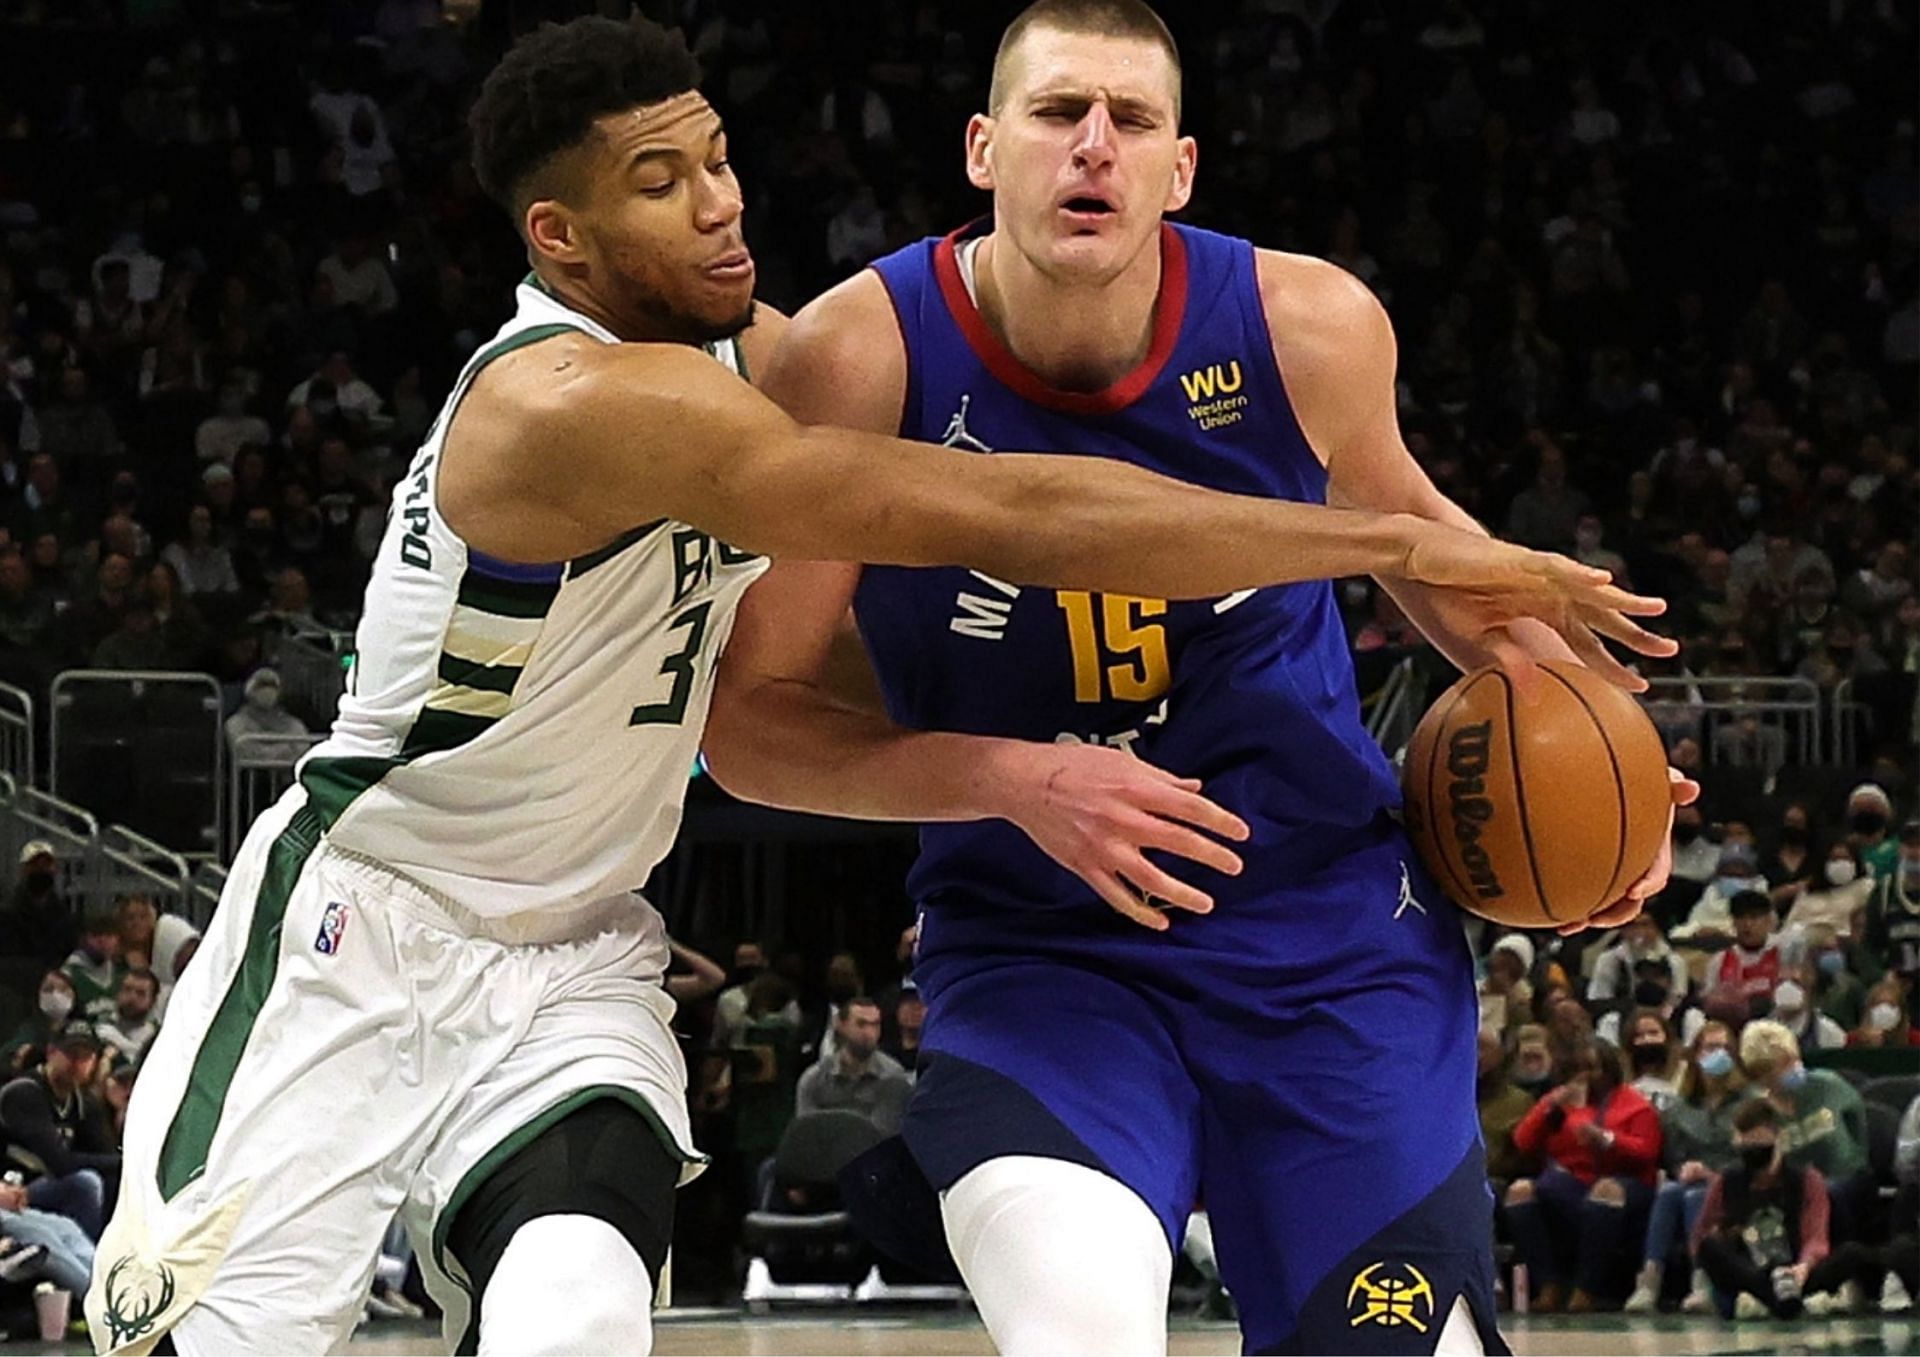 Giannis Antetokounmpo and Nikola Jokic could have a mouth-watering clash in the NBA Finals. [photo: Sporting News]